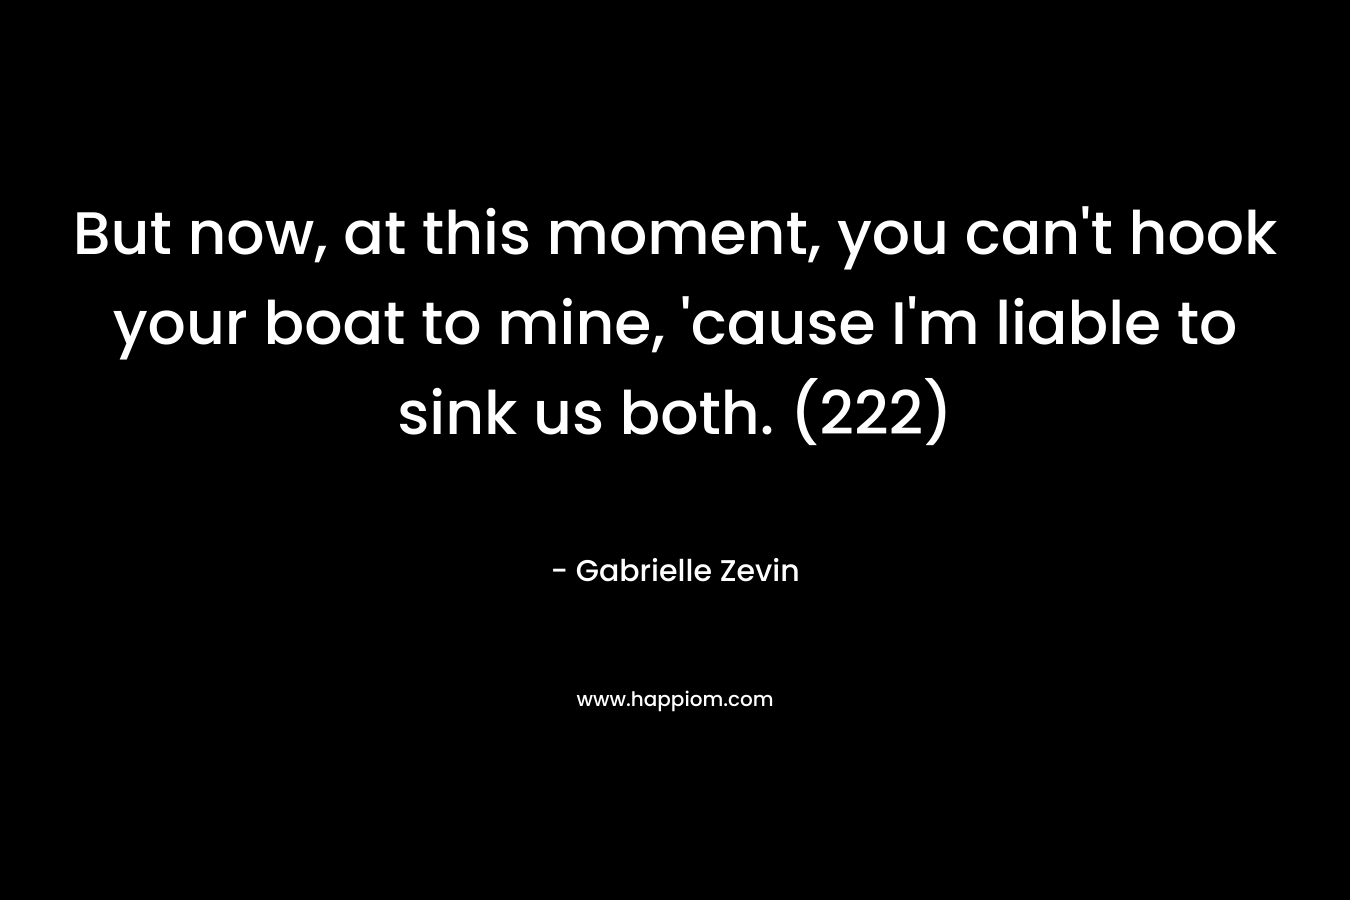 But now, at this moment, you can't hook your boat to mine, 'cause I'm liable to sink us both. (222)